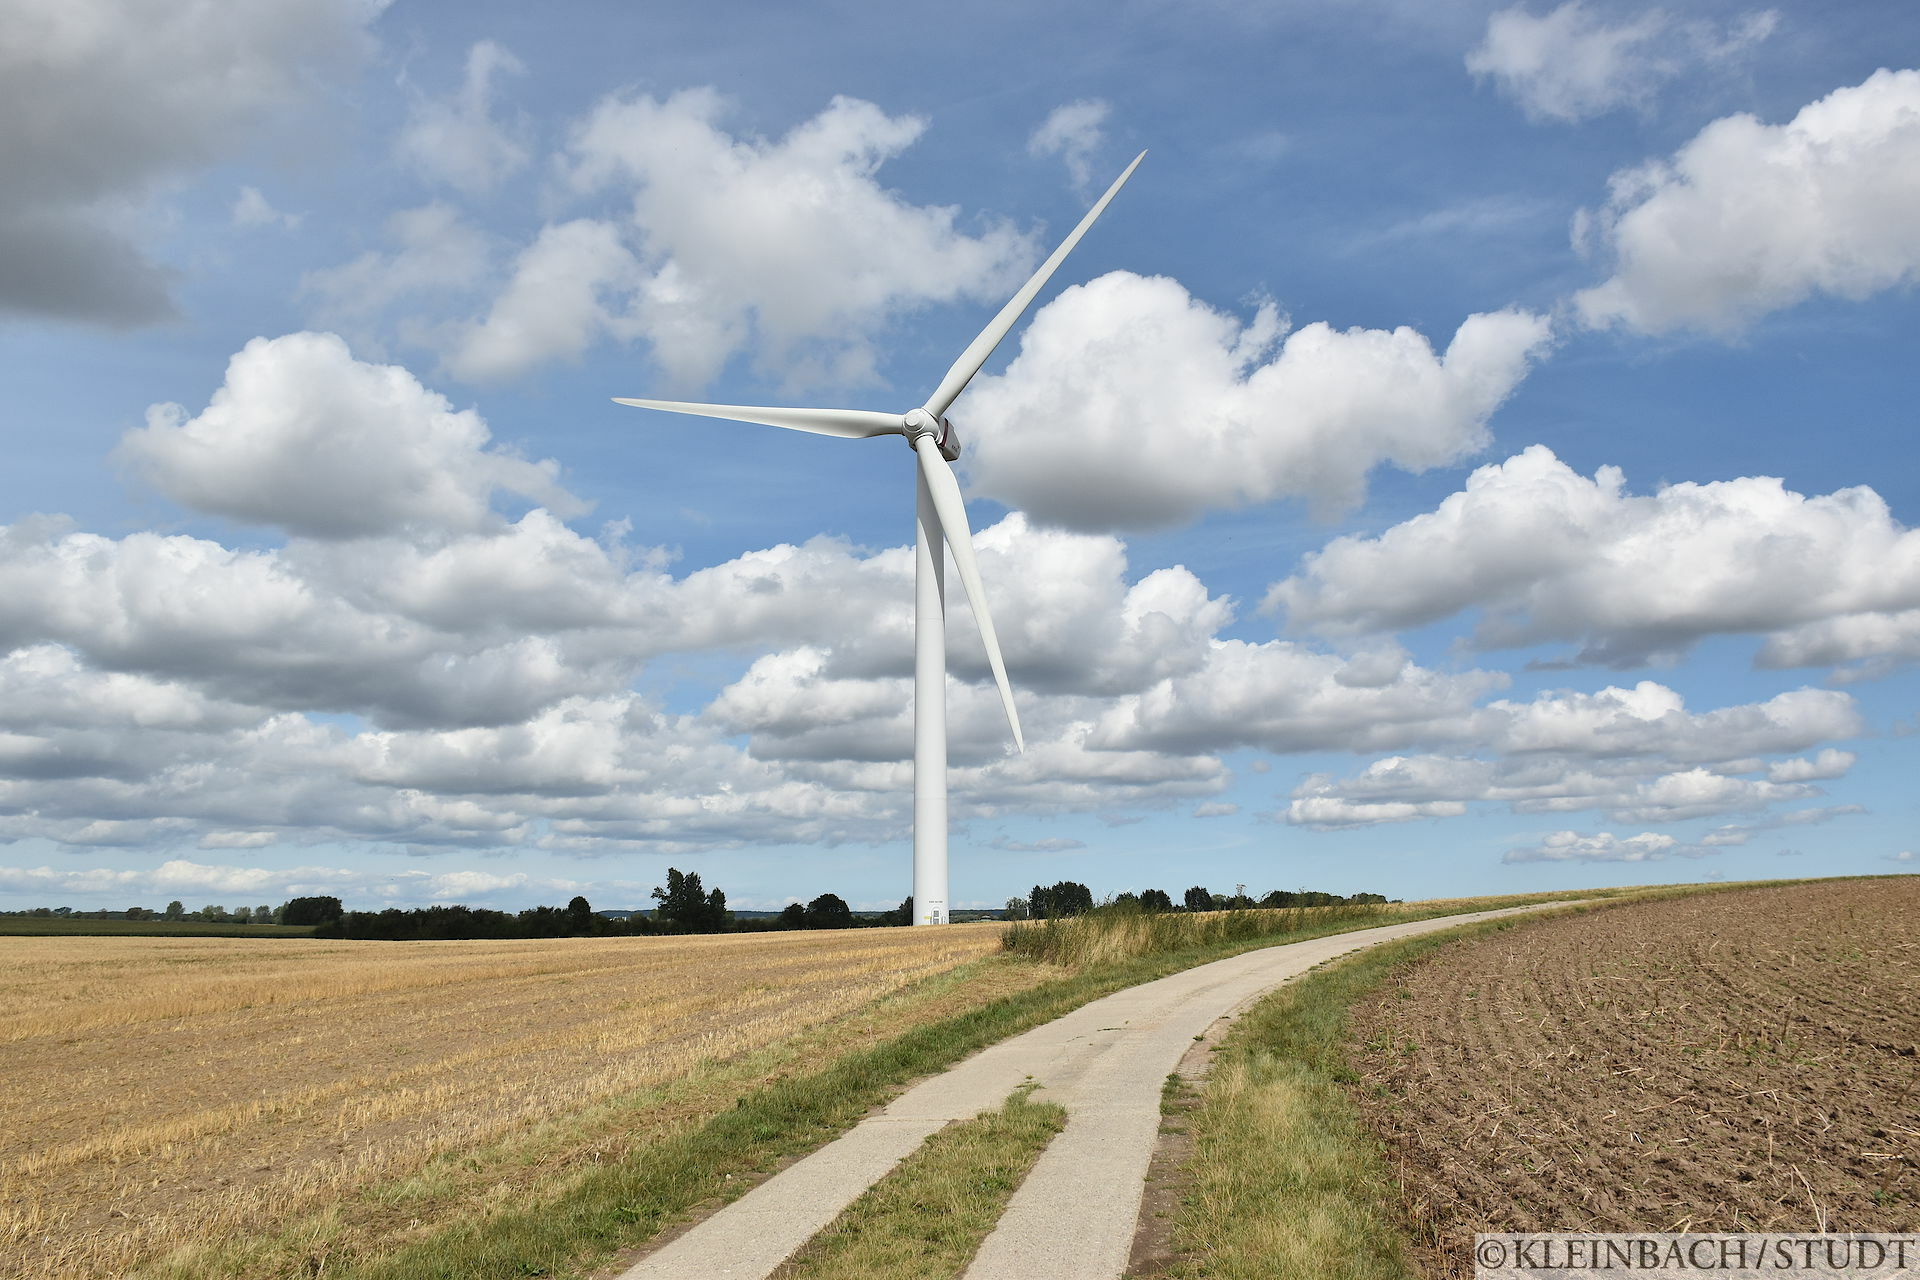 I listened to this wind turbine for a while